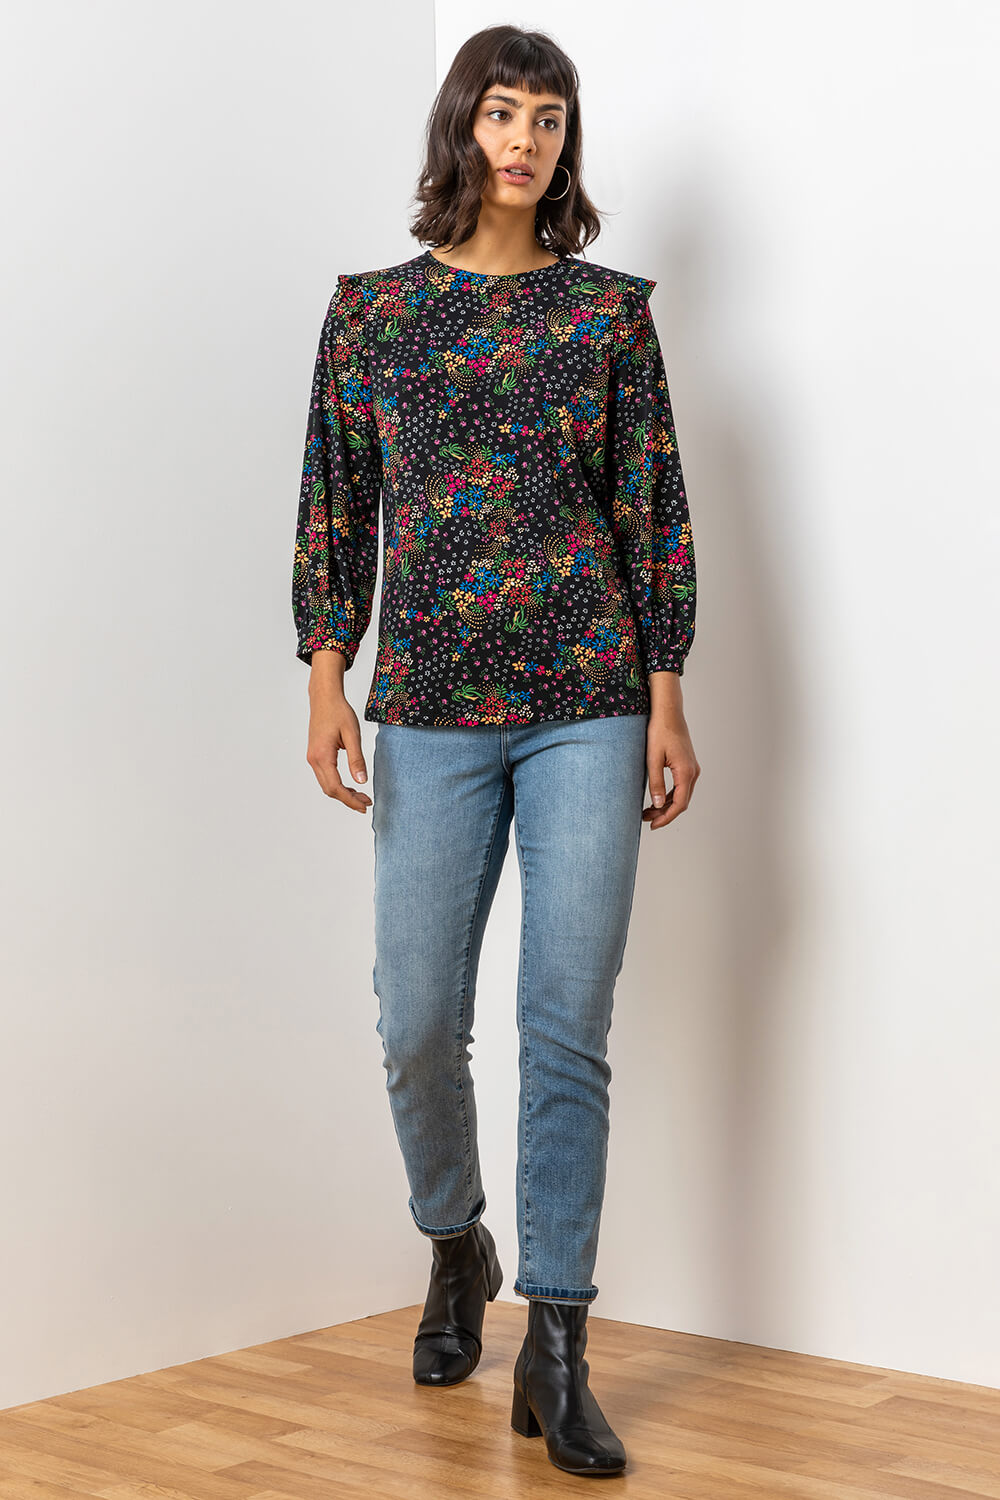 Black Floral Print Frill Detail Top, Image 3 of 4